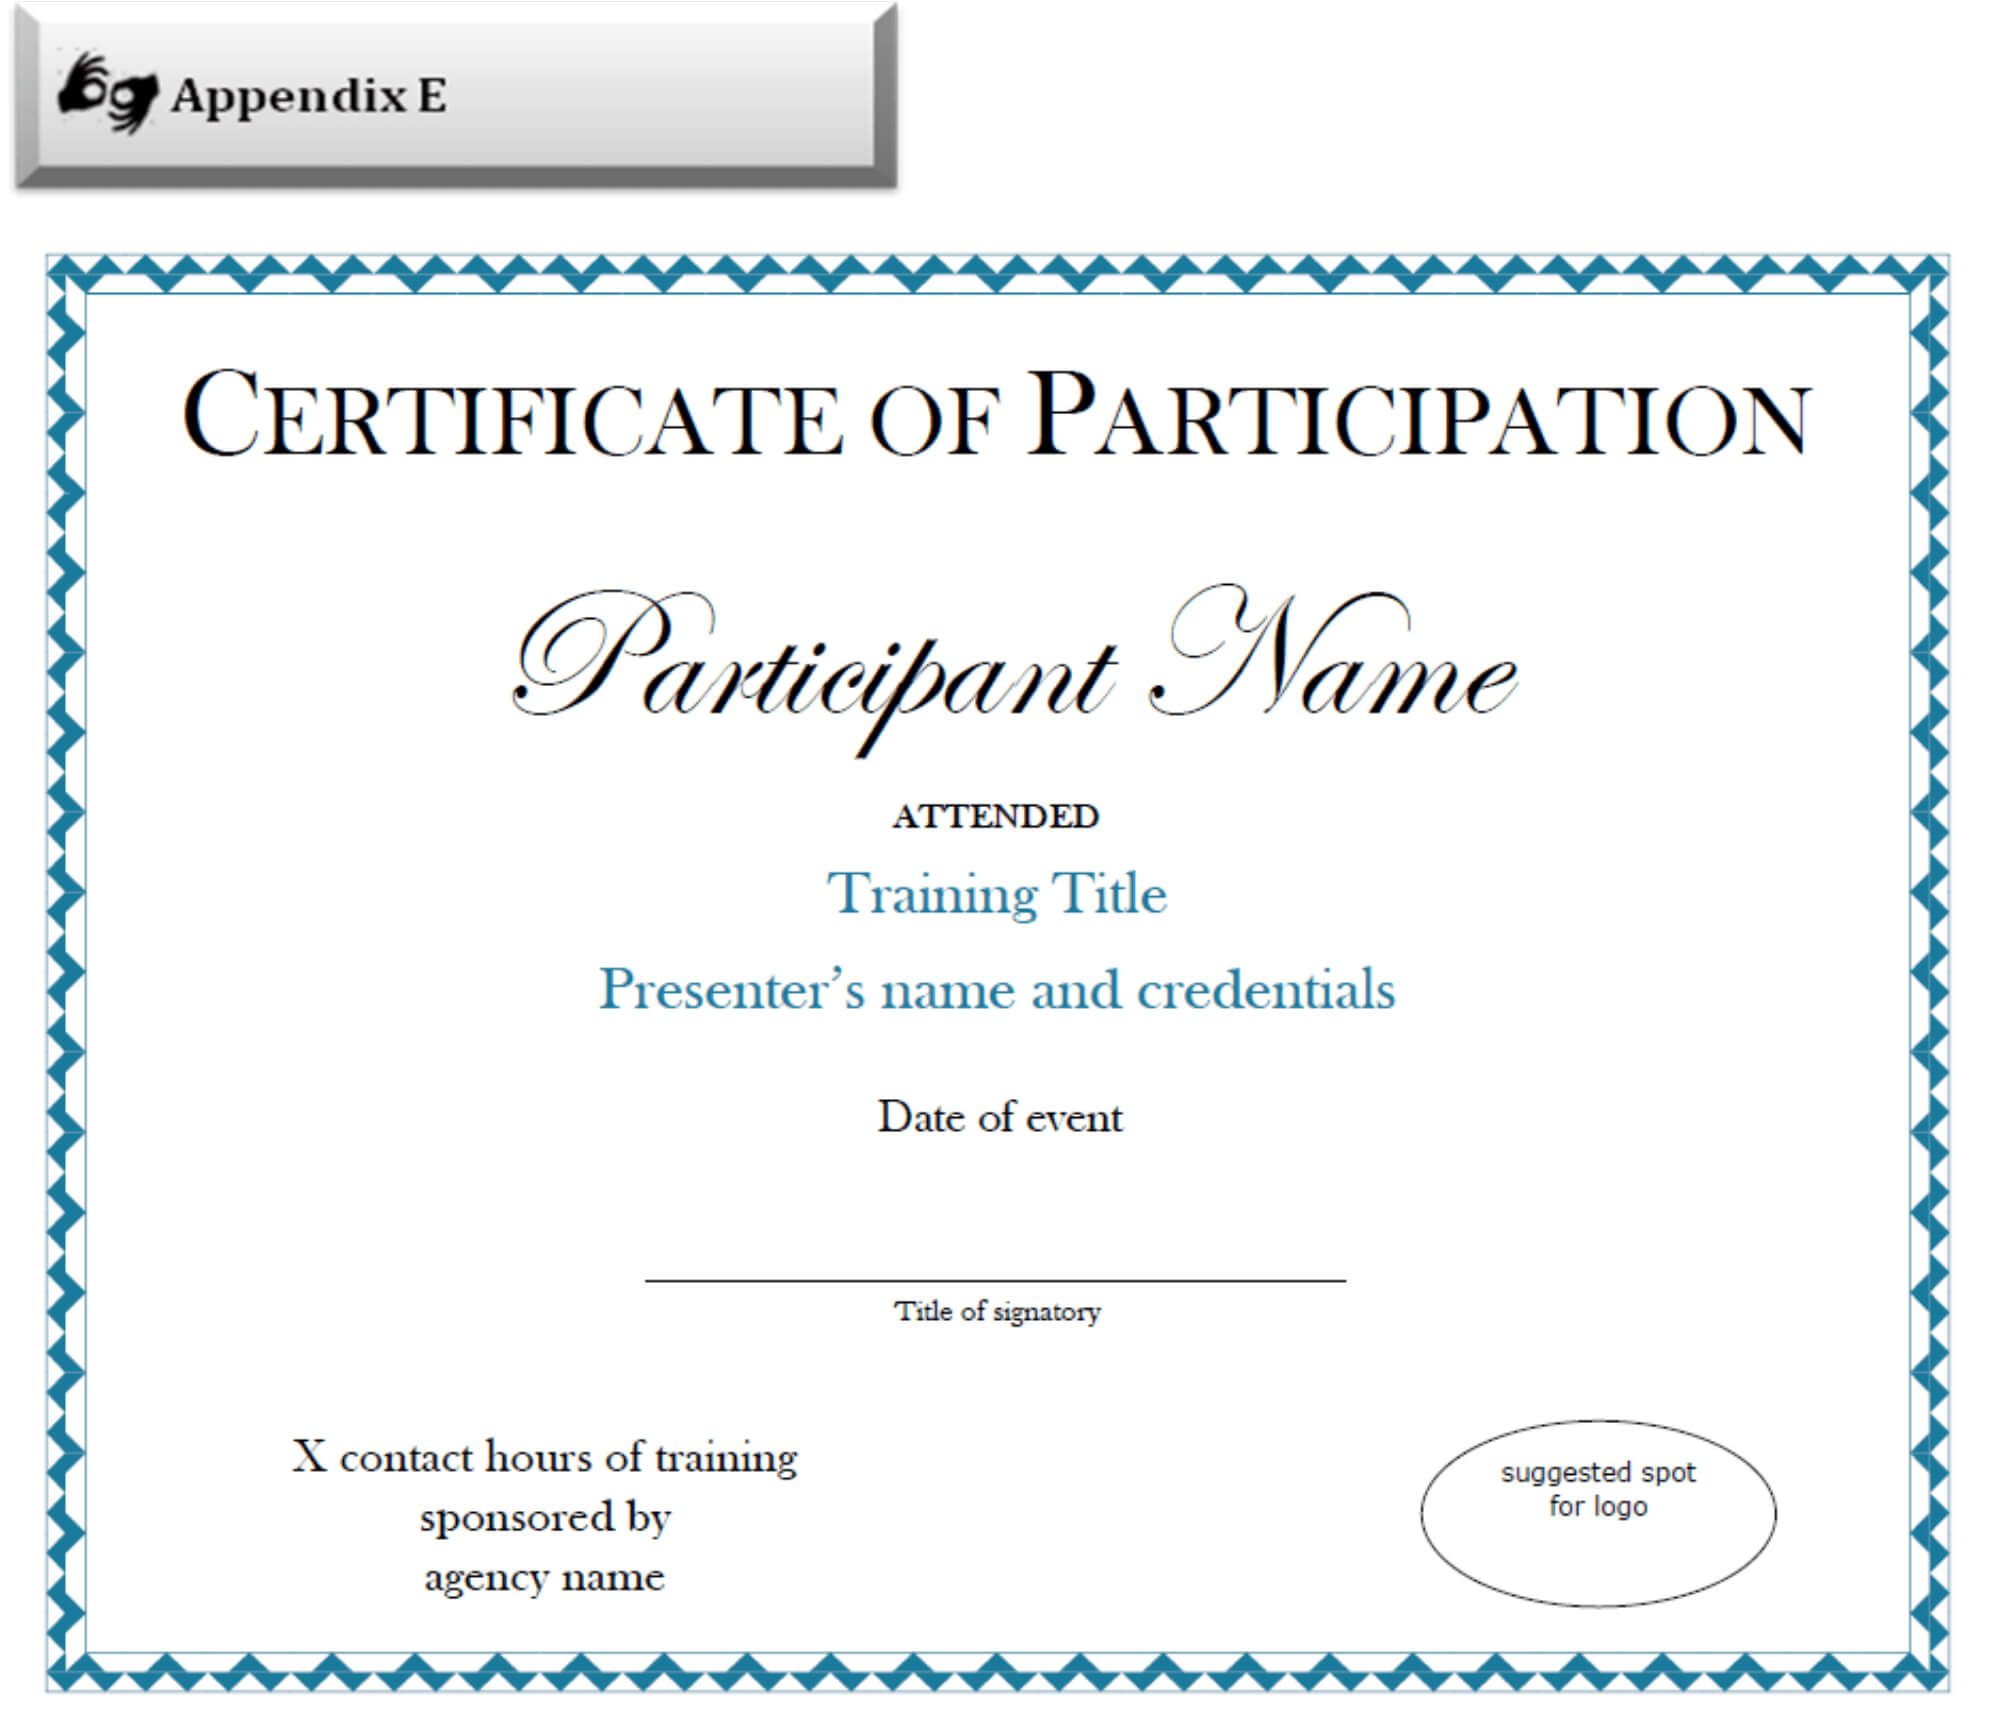 Participation Certificate Template Free Download | Sample With Participation Certificate Templates Free Download